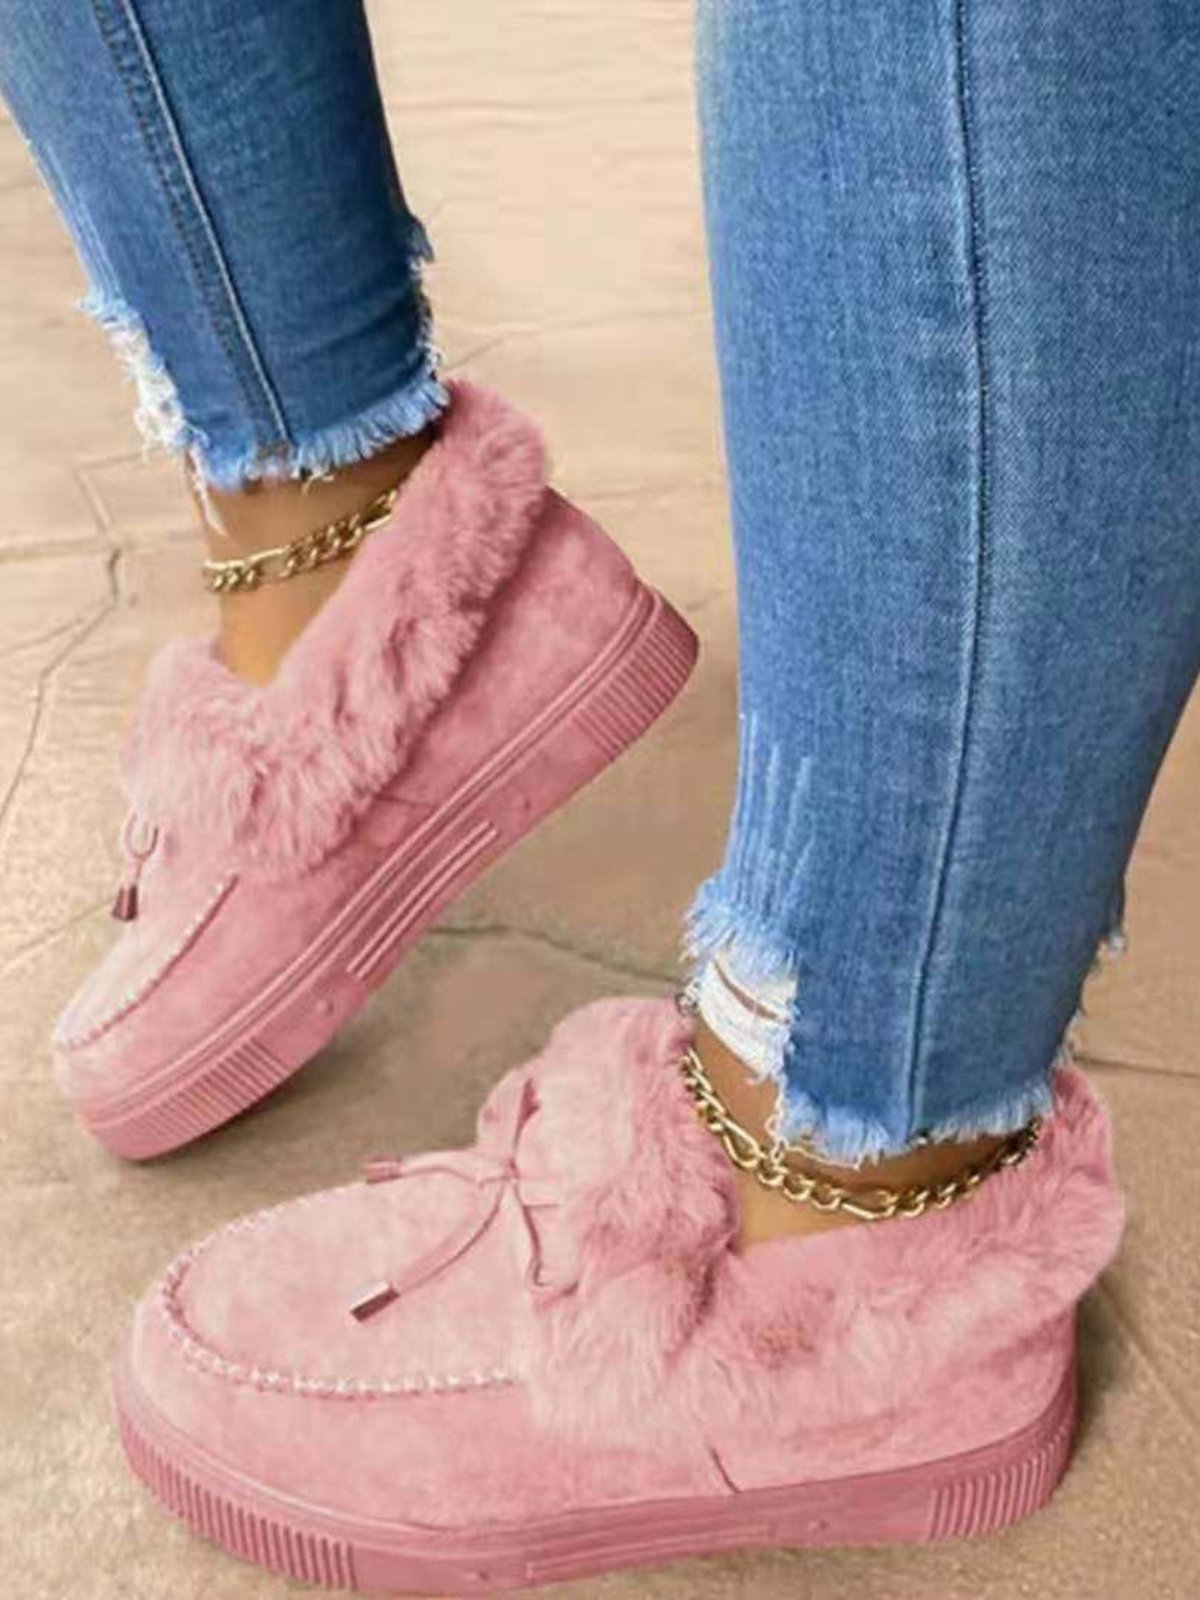 Women Fur Lined Ankle Booties